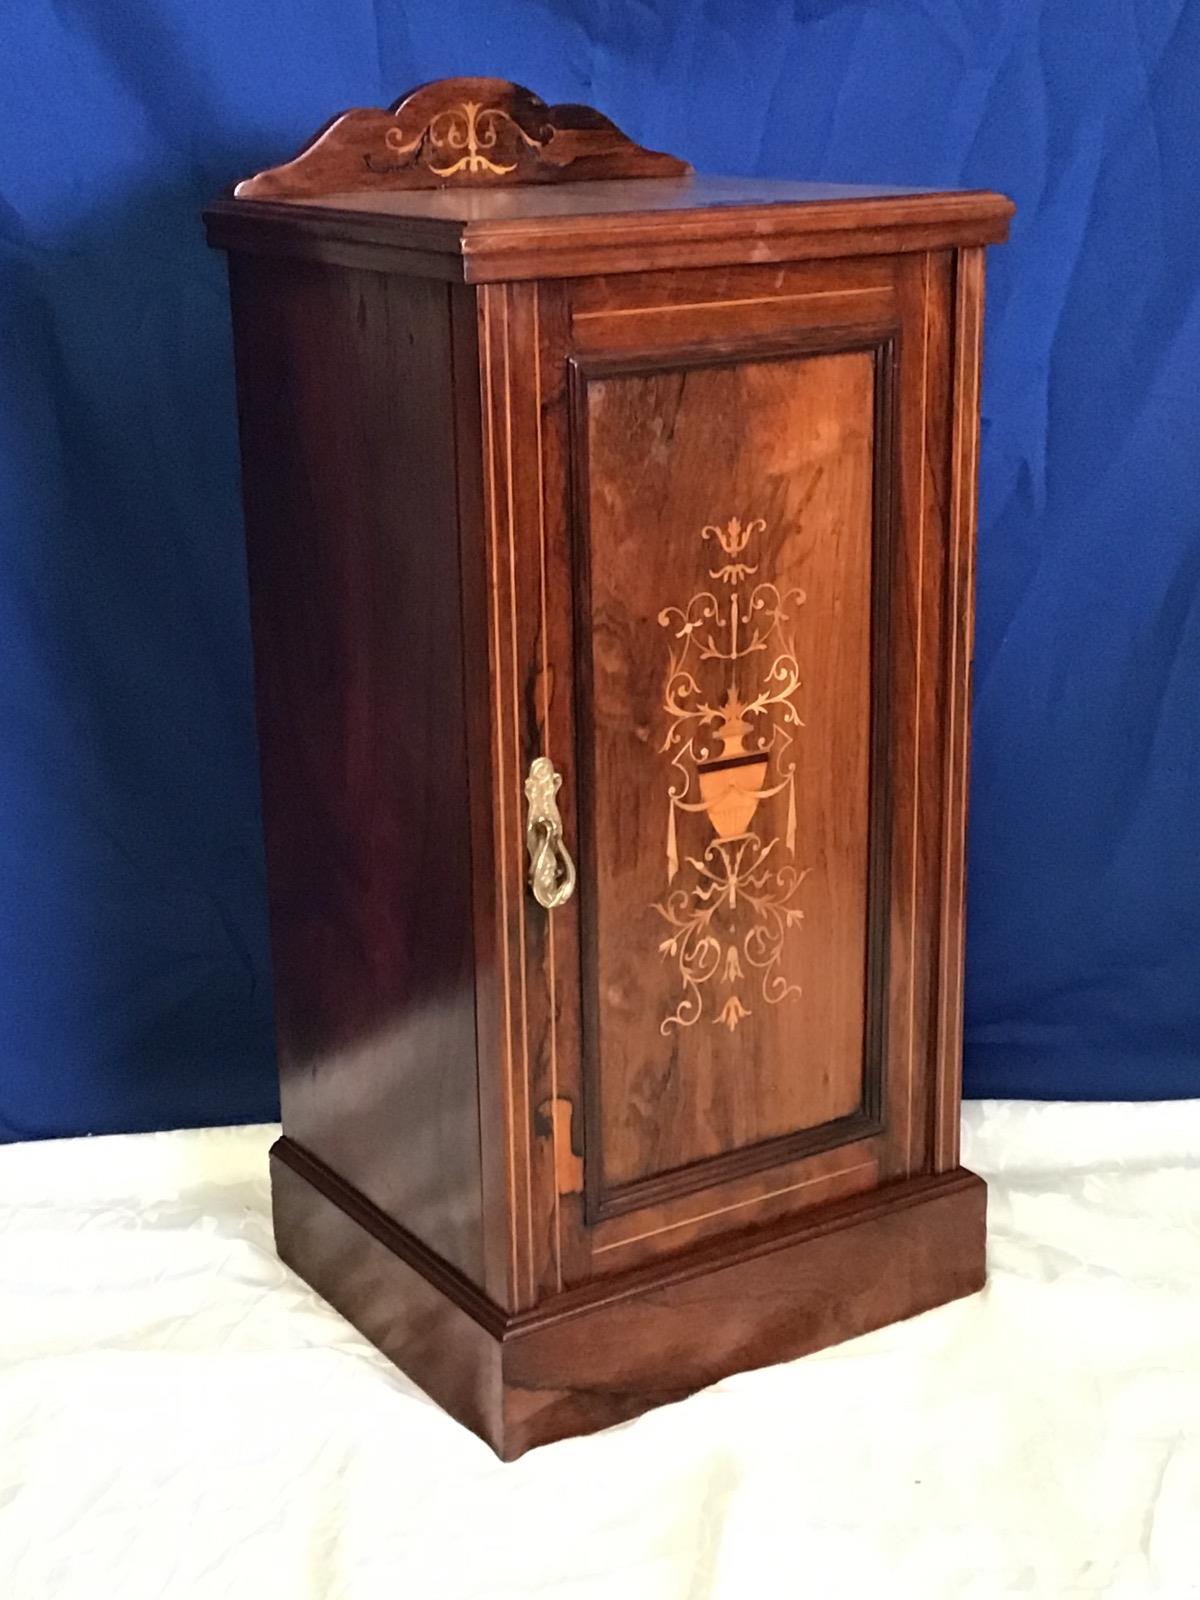 A VERY FINE ROSEWOOD SINGLE DOOR CABINET, with wonderful inlaid decorative detail to the door, - Image 3 of 3